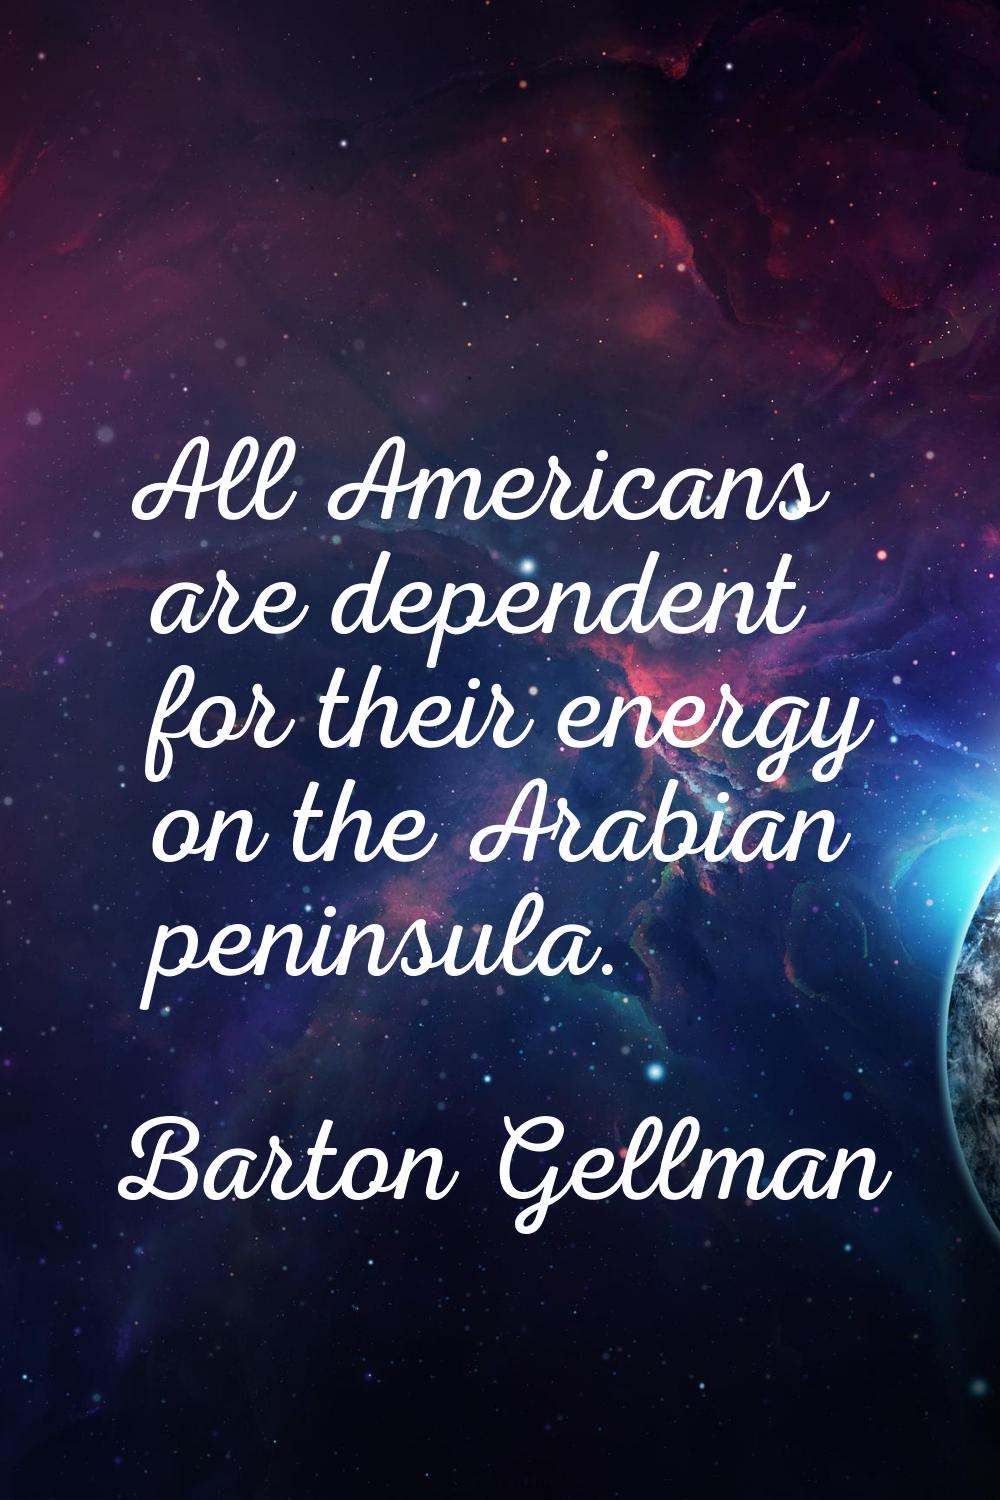 All Americans are dependent for their energy on the Arabian peninsula.